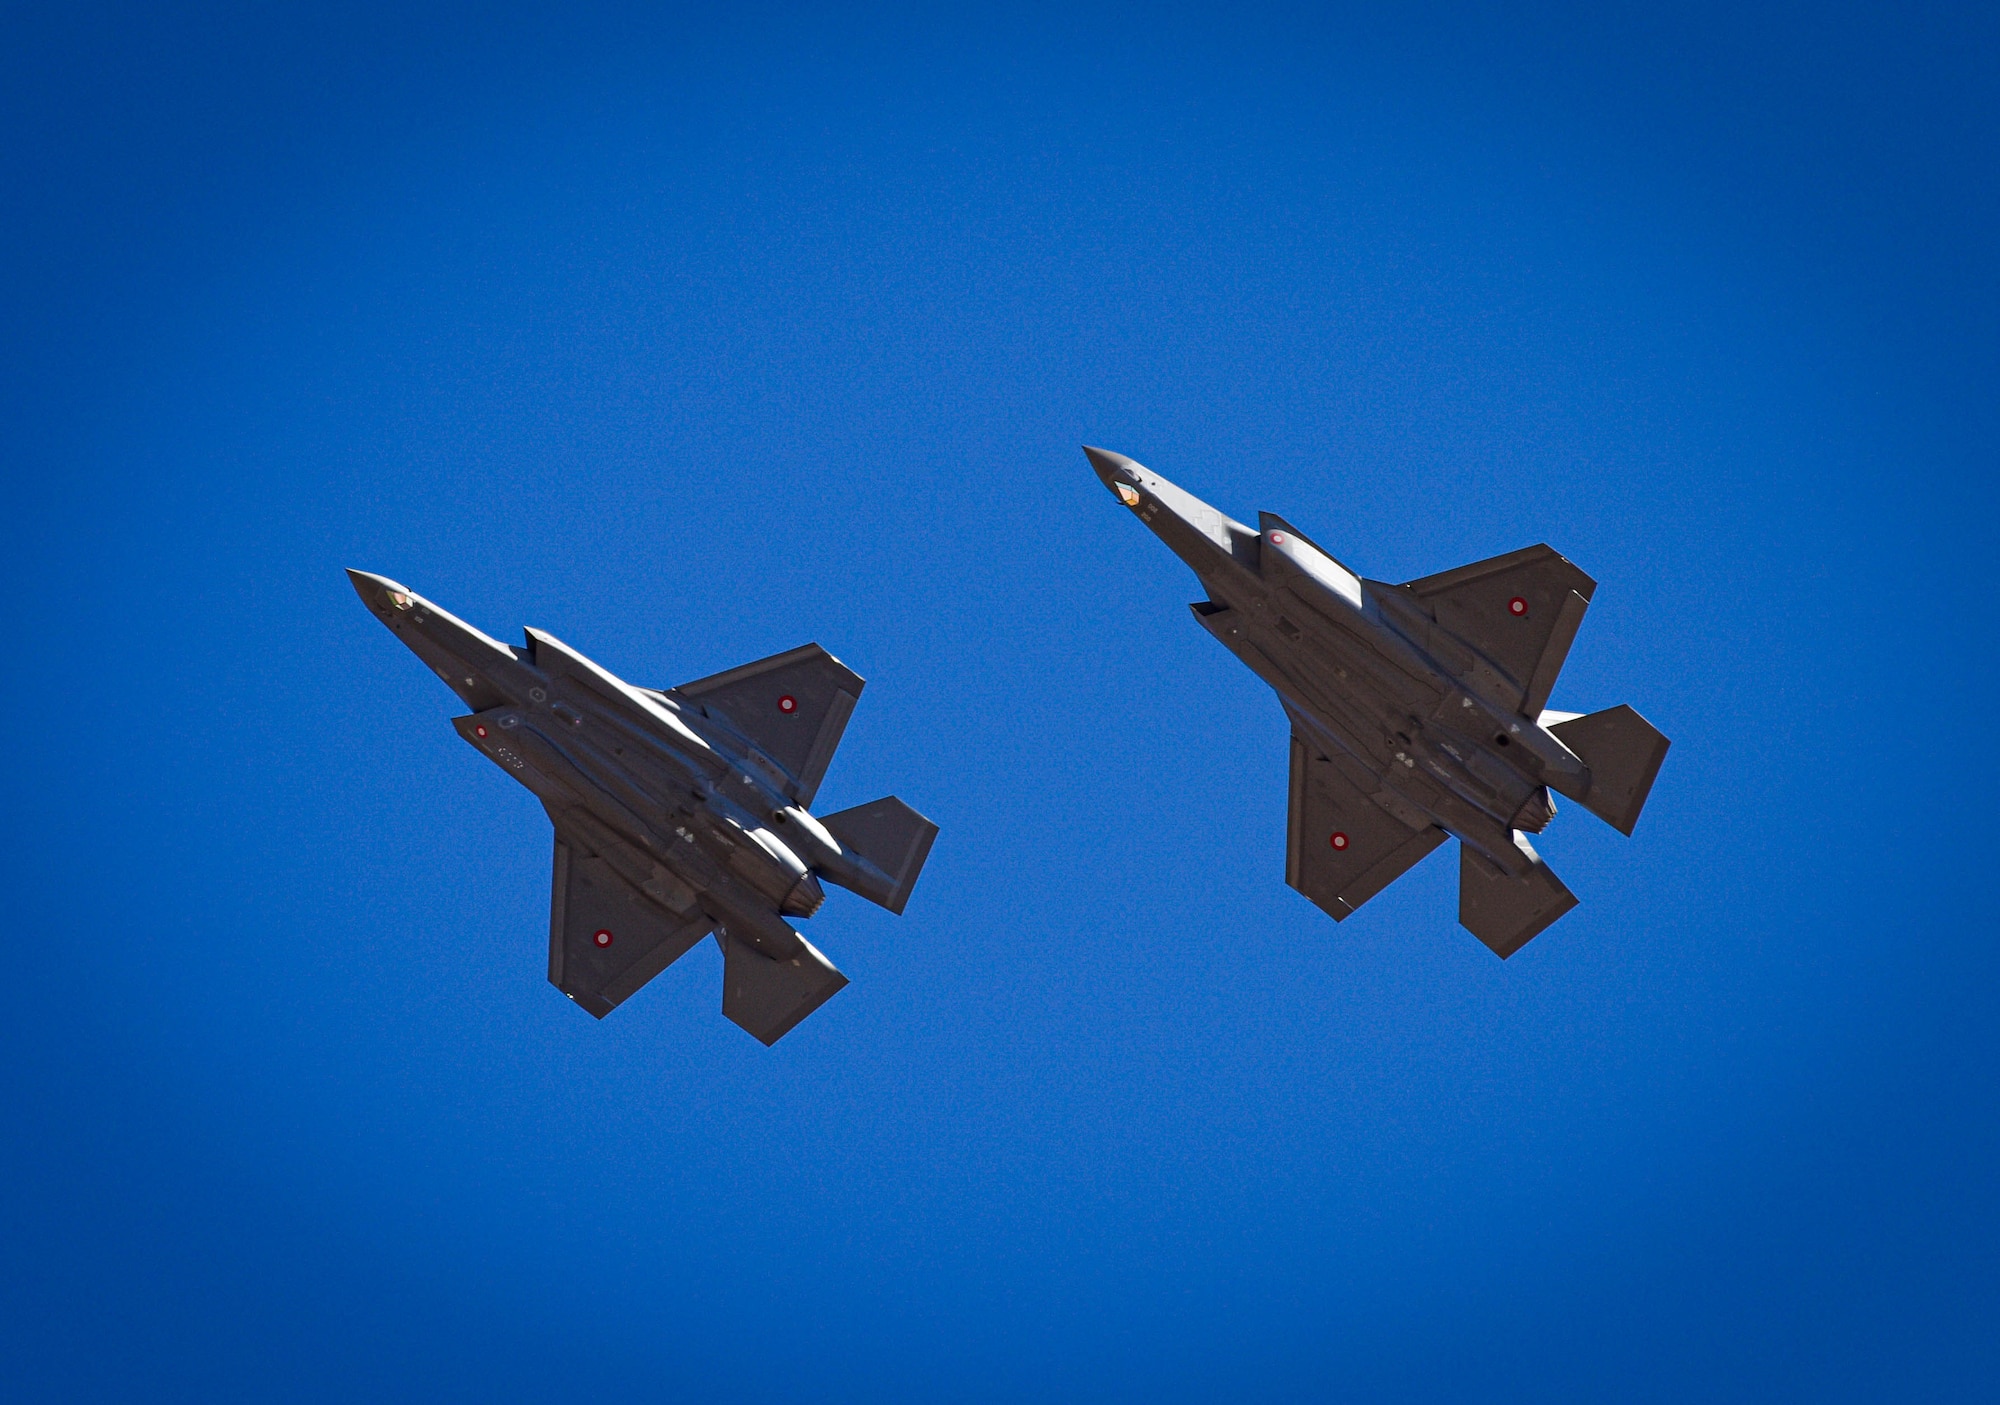 Two Royal Danish Air Force F-35A Lightning II fighter jets assigned to the 308th Fighter Squadron soar, April 13, 2021, over Luke Air Force Base, Arizona.